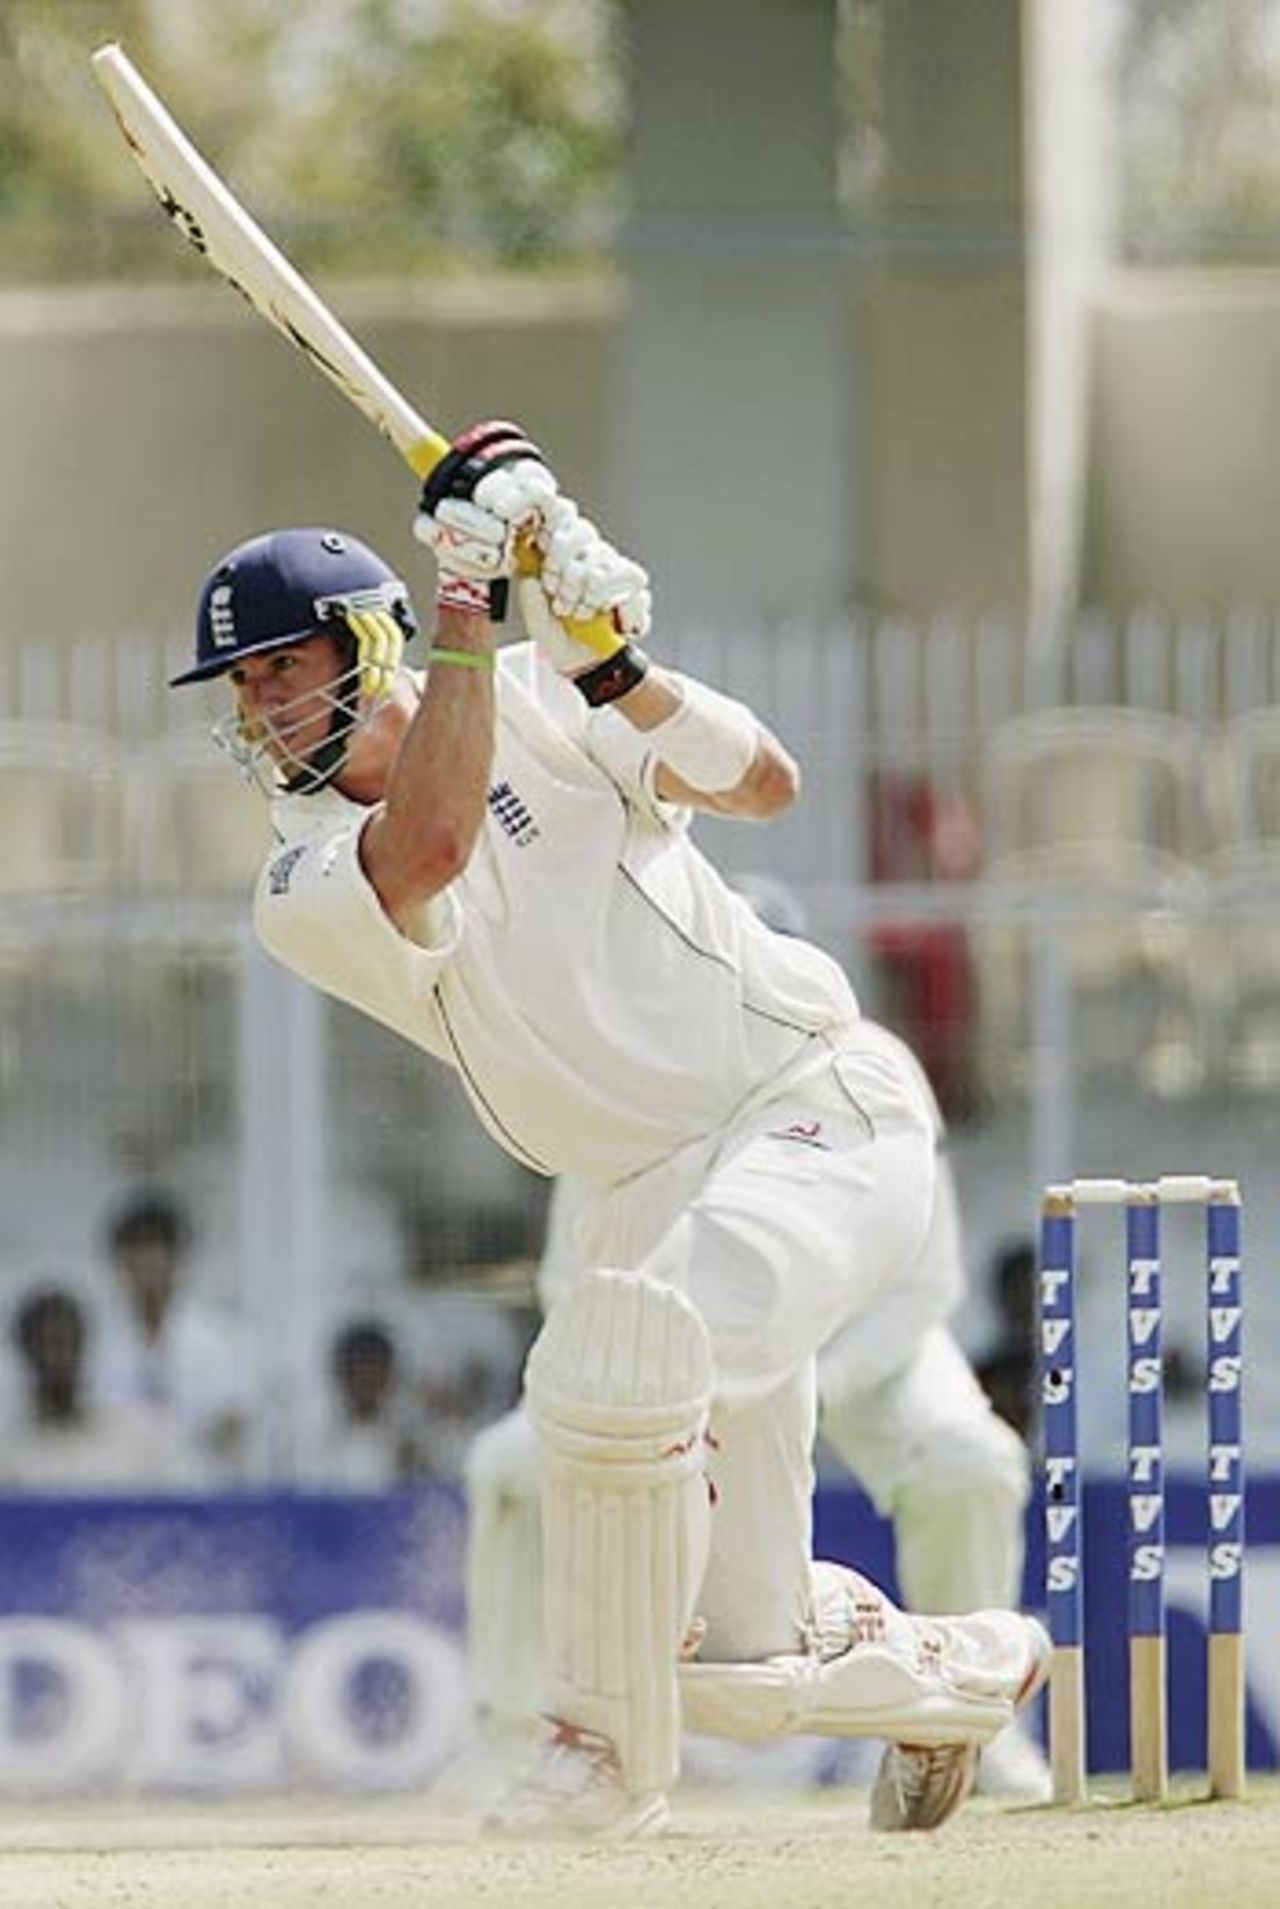 Kevin Pietersen rode his luck to bring up fifty just after tea, India v England, Nagpur, March 4, 2006